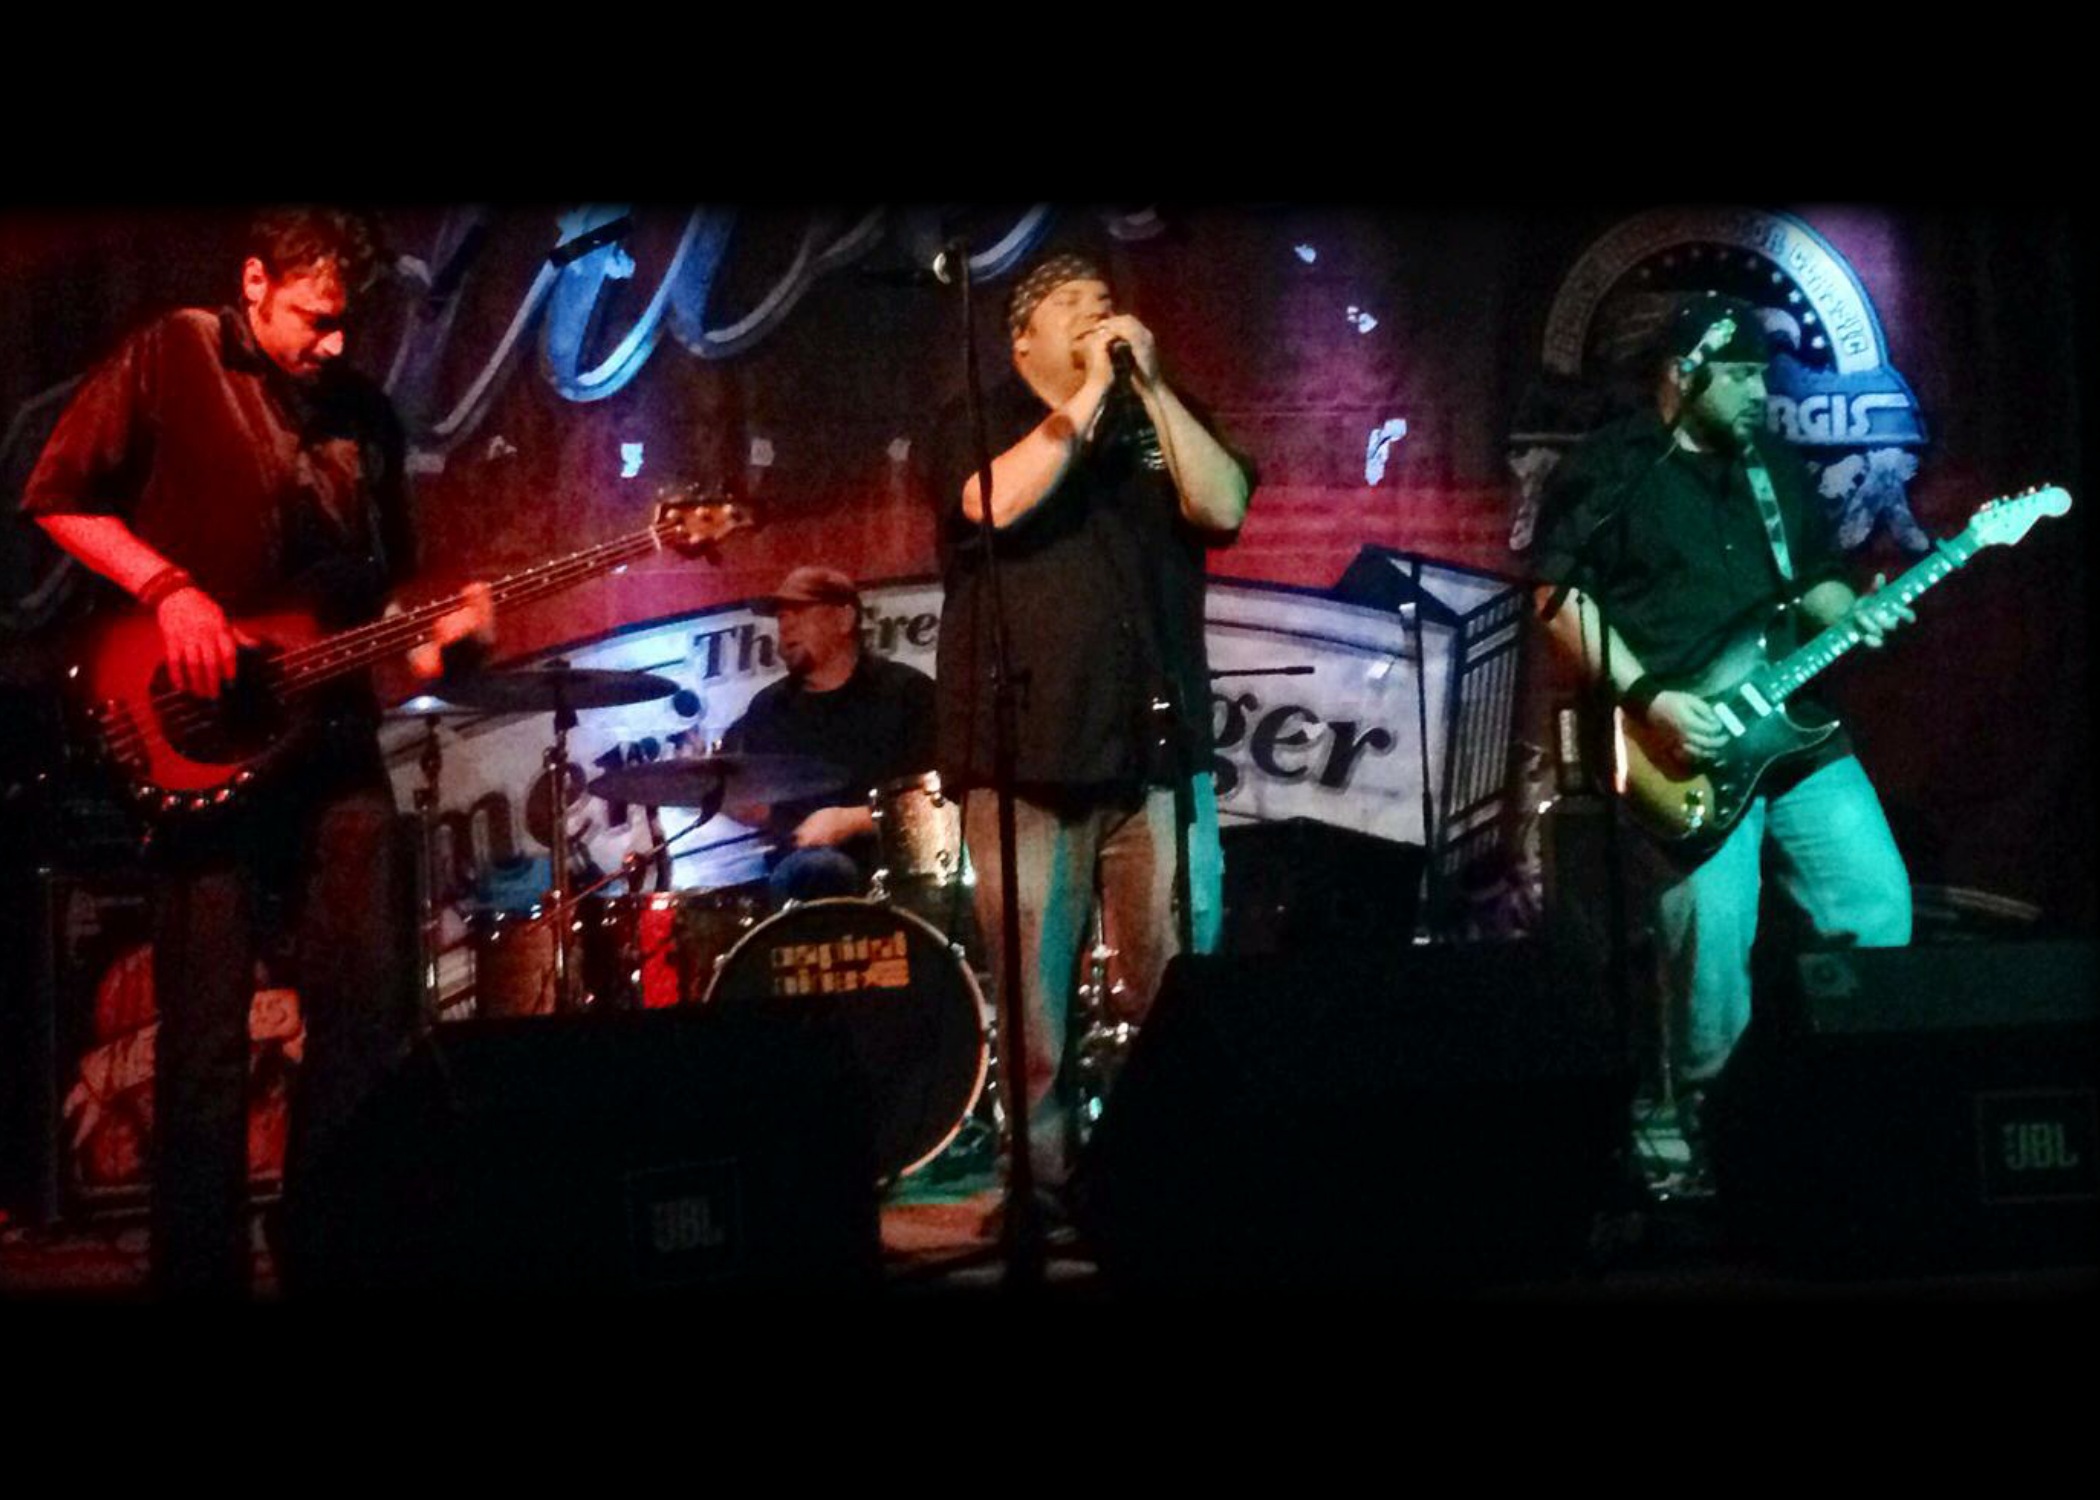 Live Music at The Depot in Norfolk, NE - 
						Northeast Nebraska Band Capital Nine    
						performing live at The Depot in Norfolk, Nebraska 
						on Wednesday, November 25, 2015.
						The Depot is located at 
						211 W Northwestern Avenue, 
						Norfolk, NE 68701, 
						Phone (402) 844-3241.